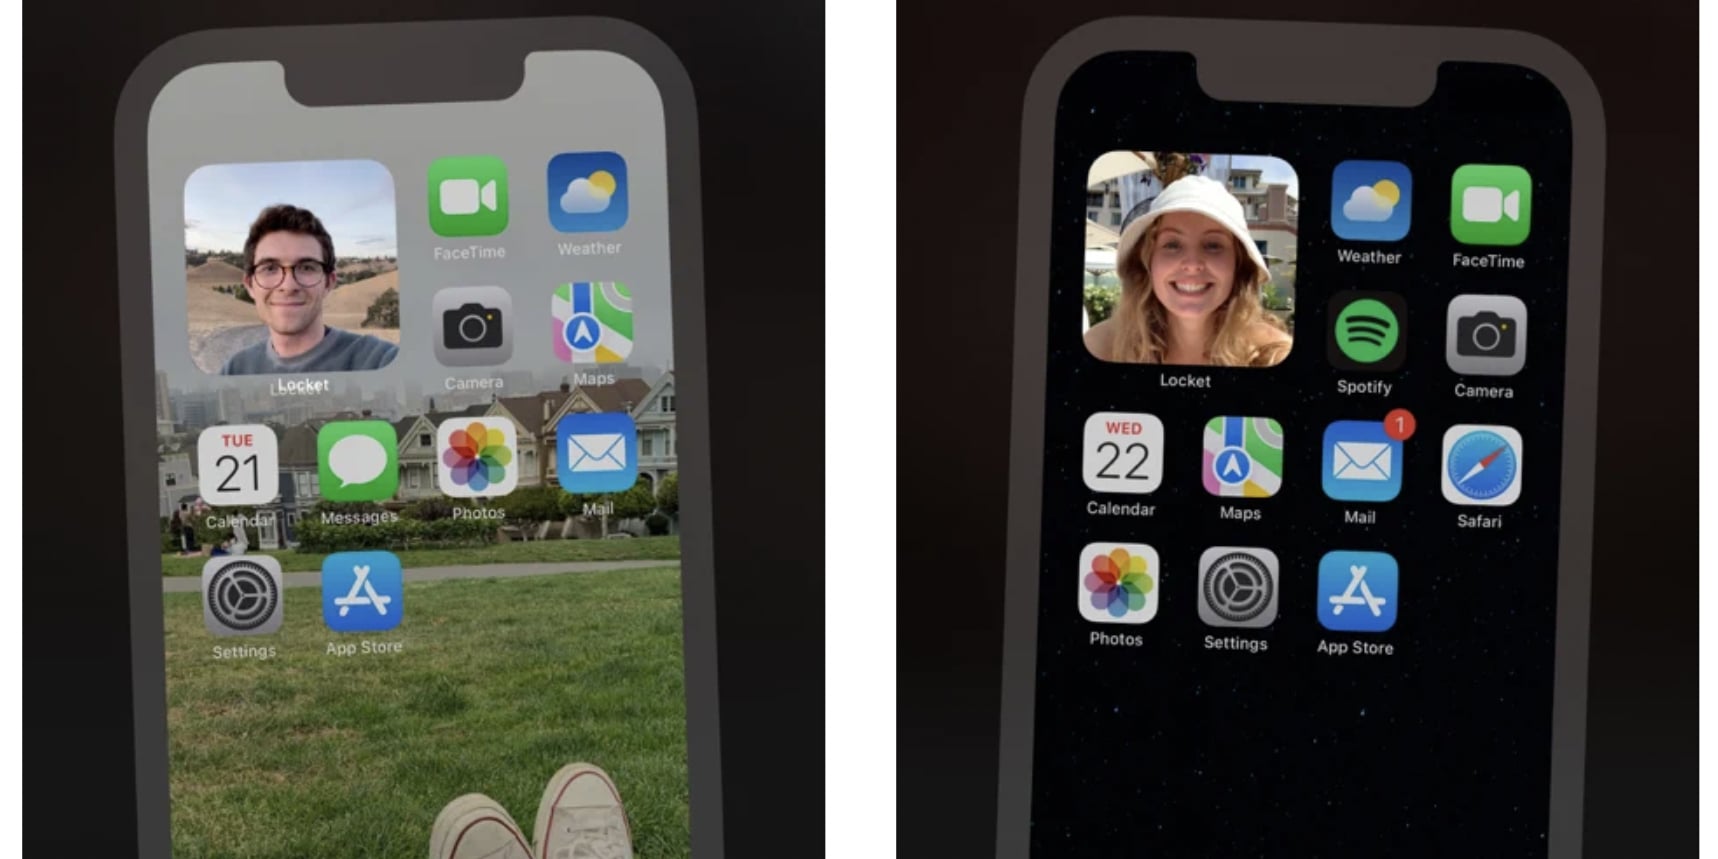 Locket app will put your face on your friends' home screen